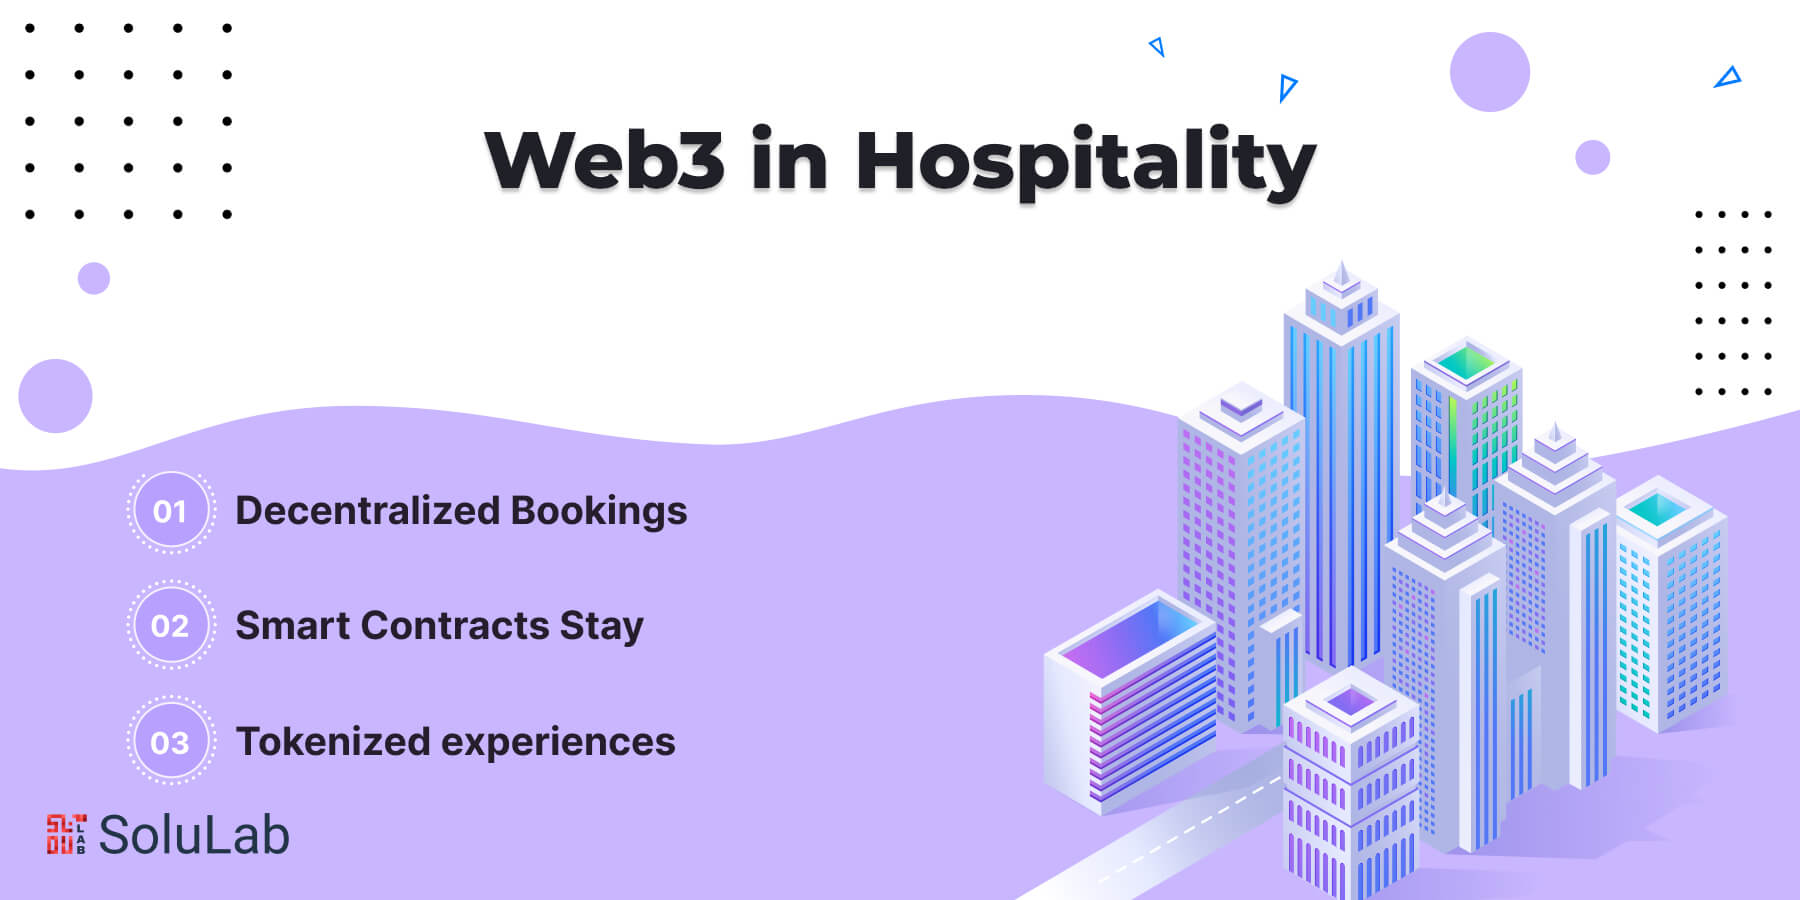 Web3 in Hospitality